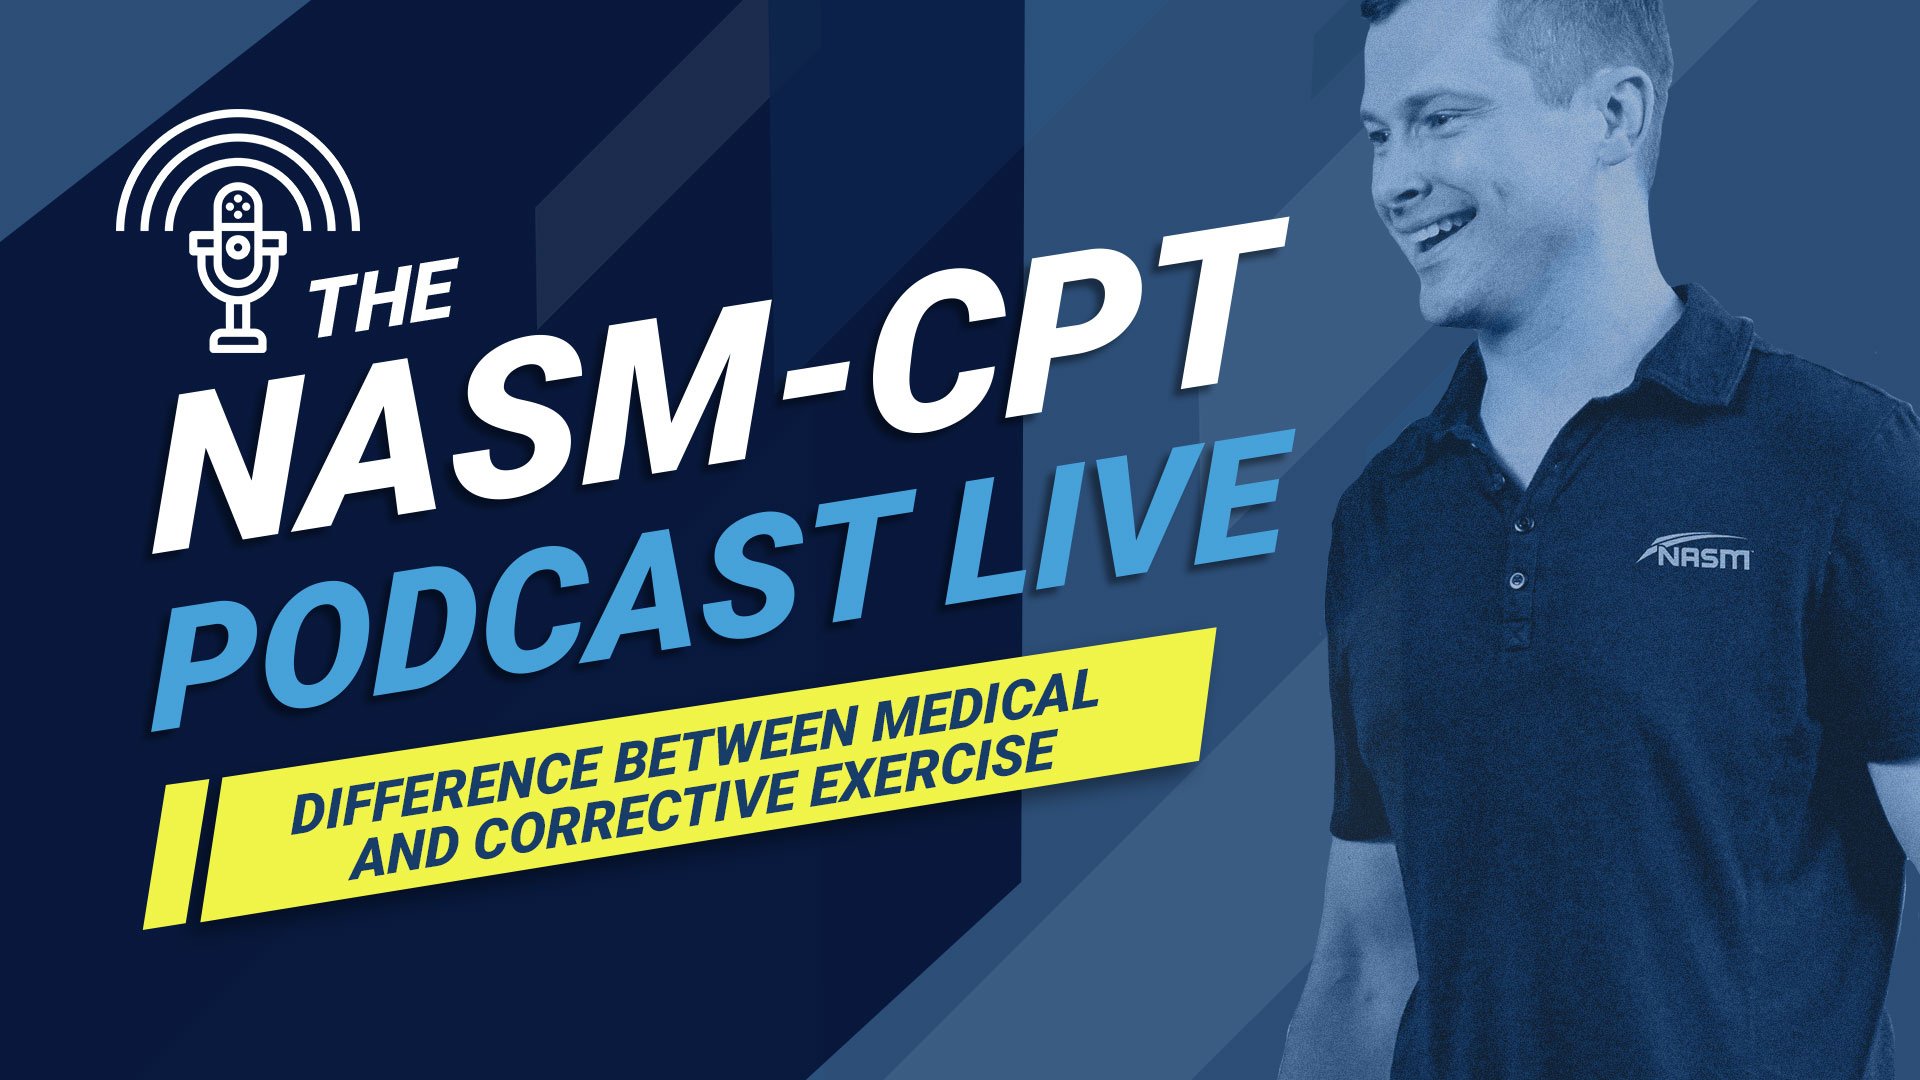 Clenbuterolfr-CPT podcast on corrective versus medical exercise